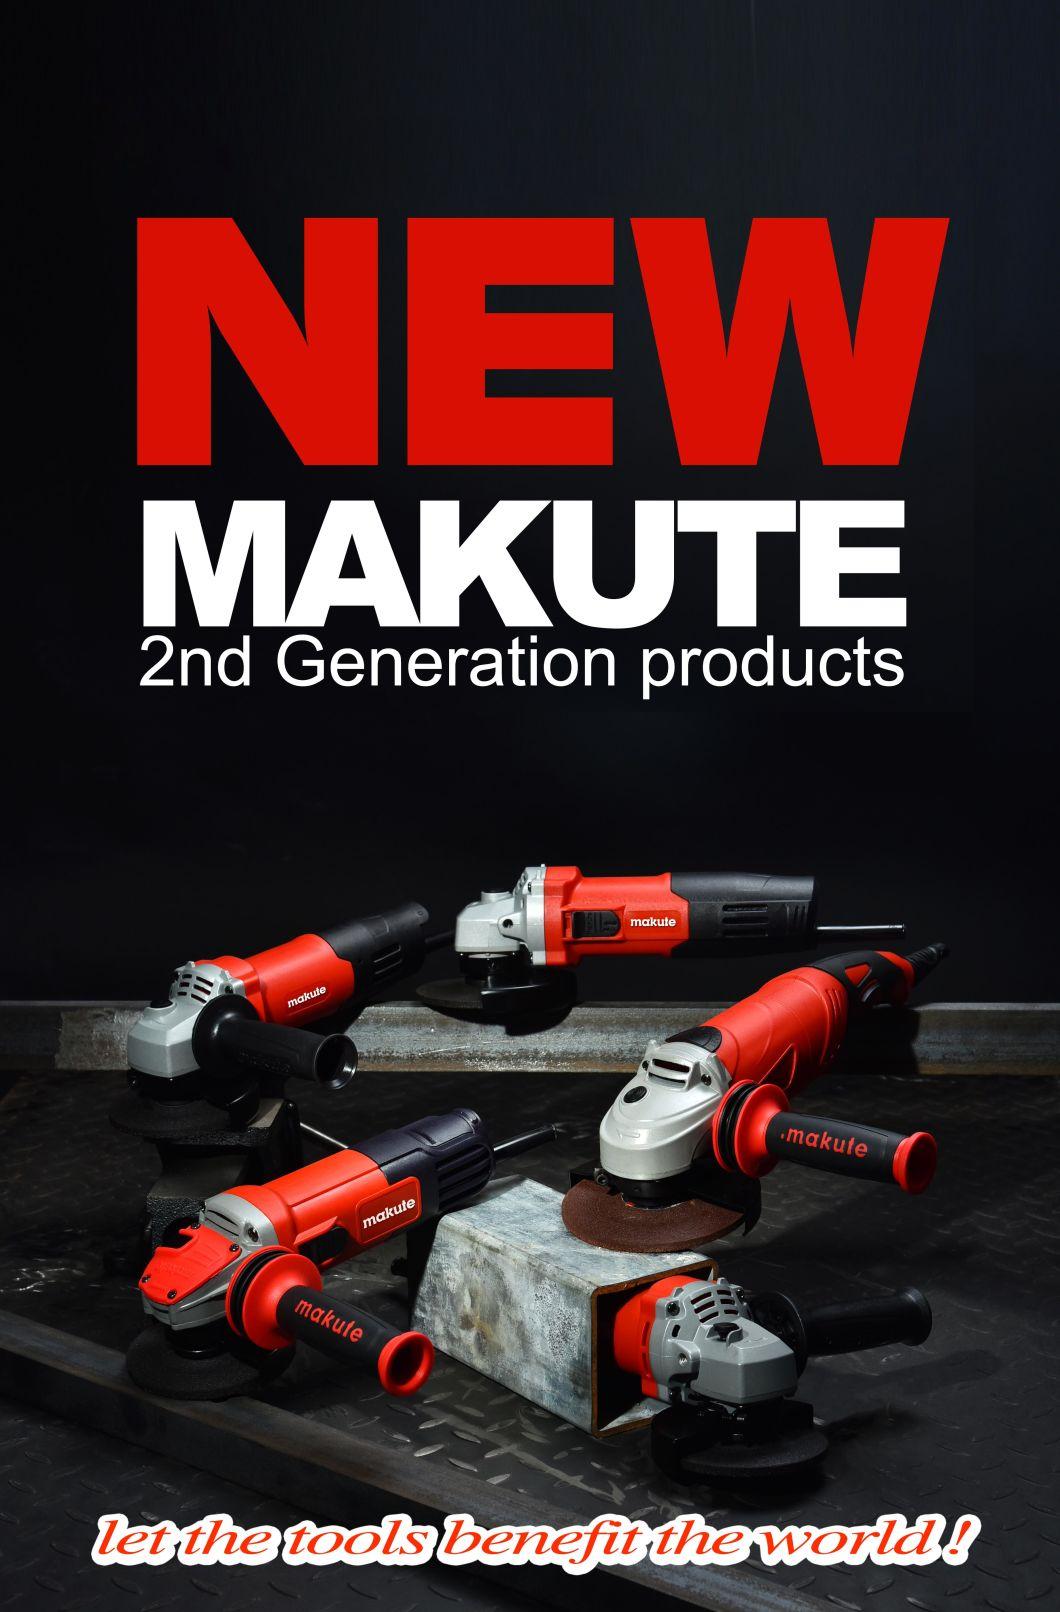 850W Makute 100/115/125mm Electric Mini Angle Grinder Milling Grindering